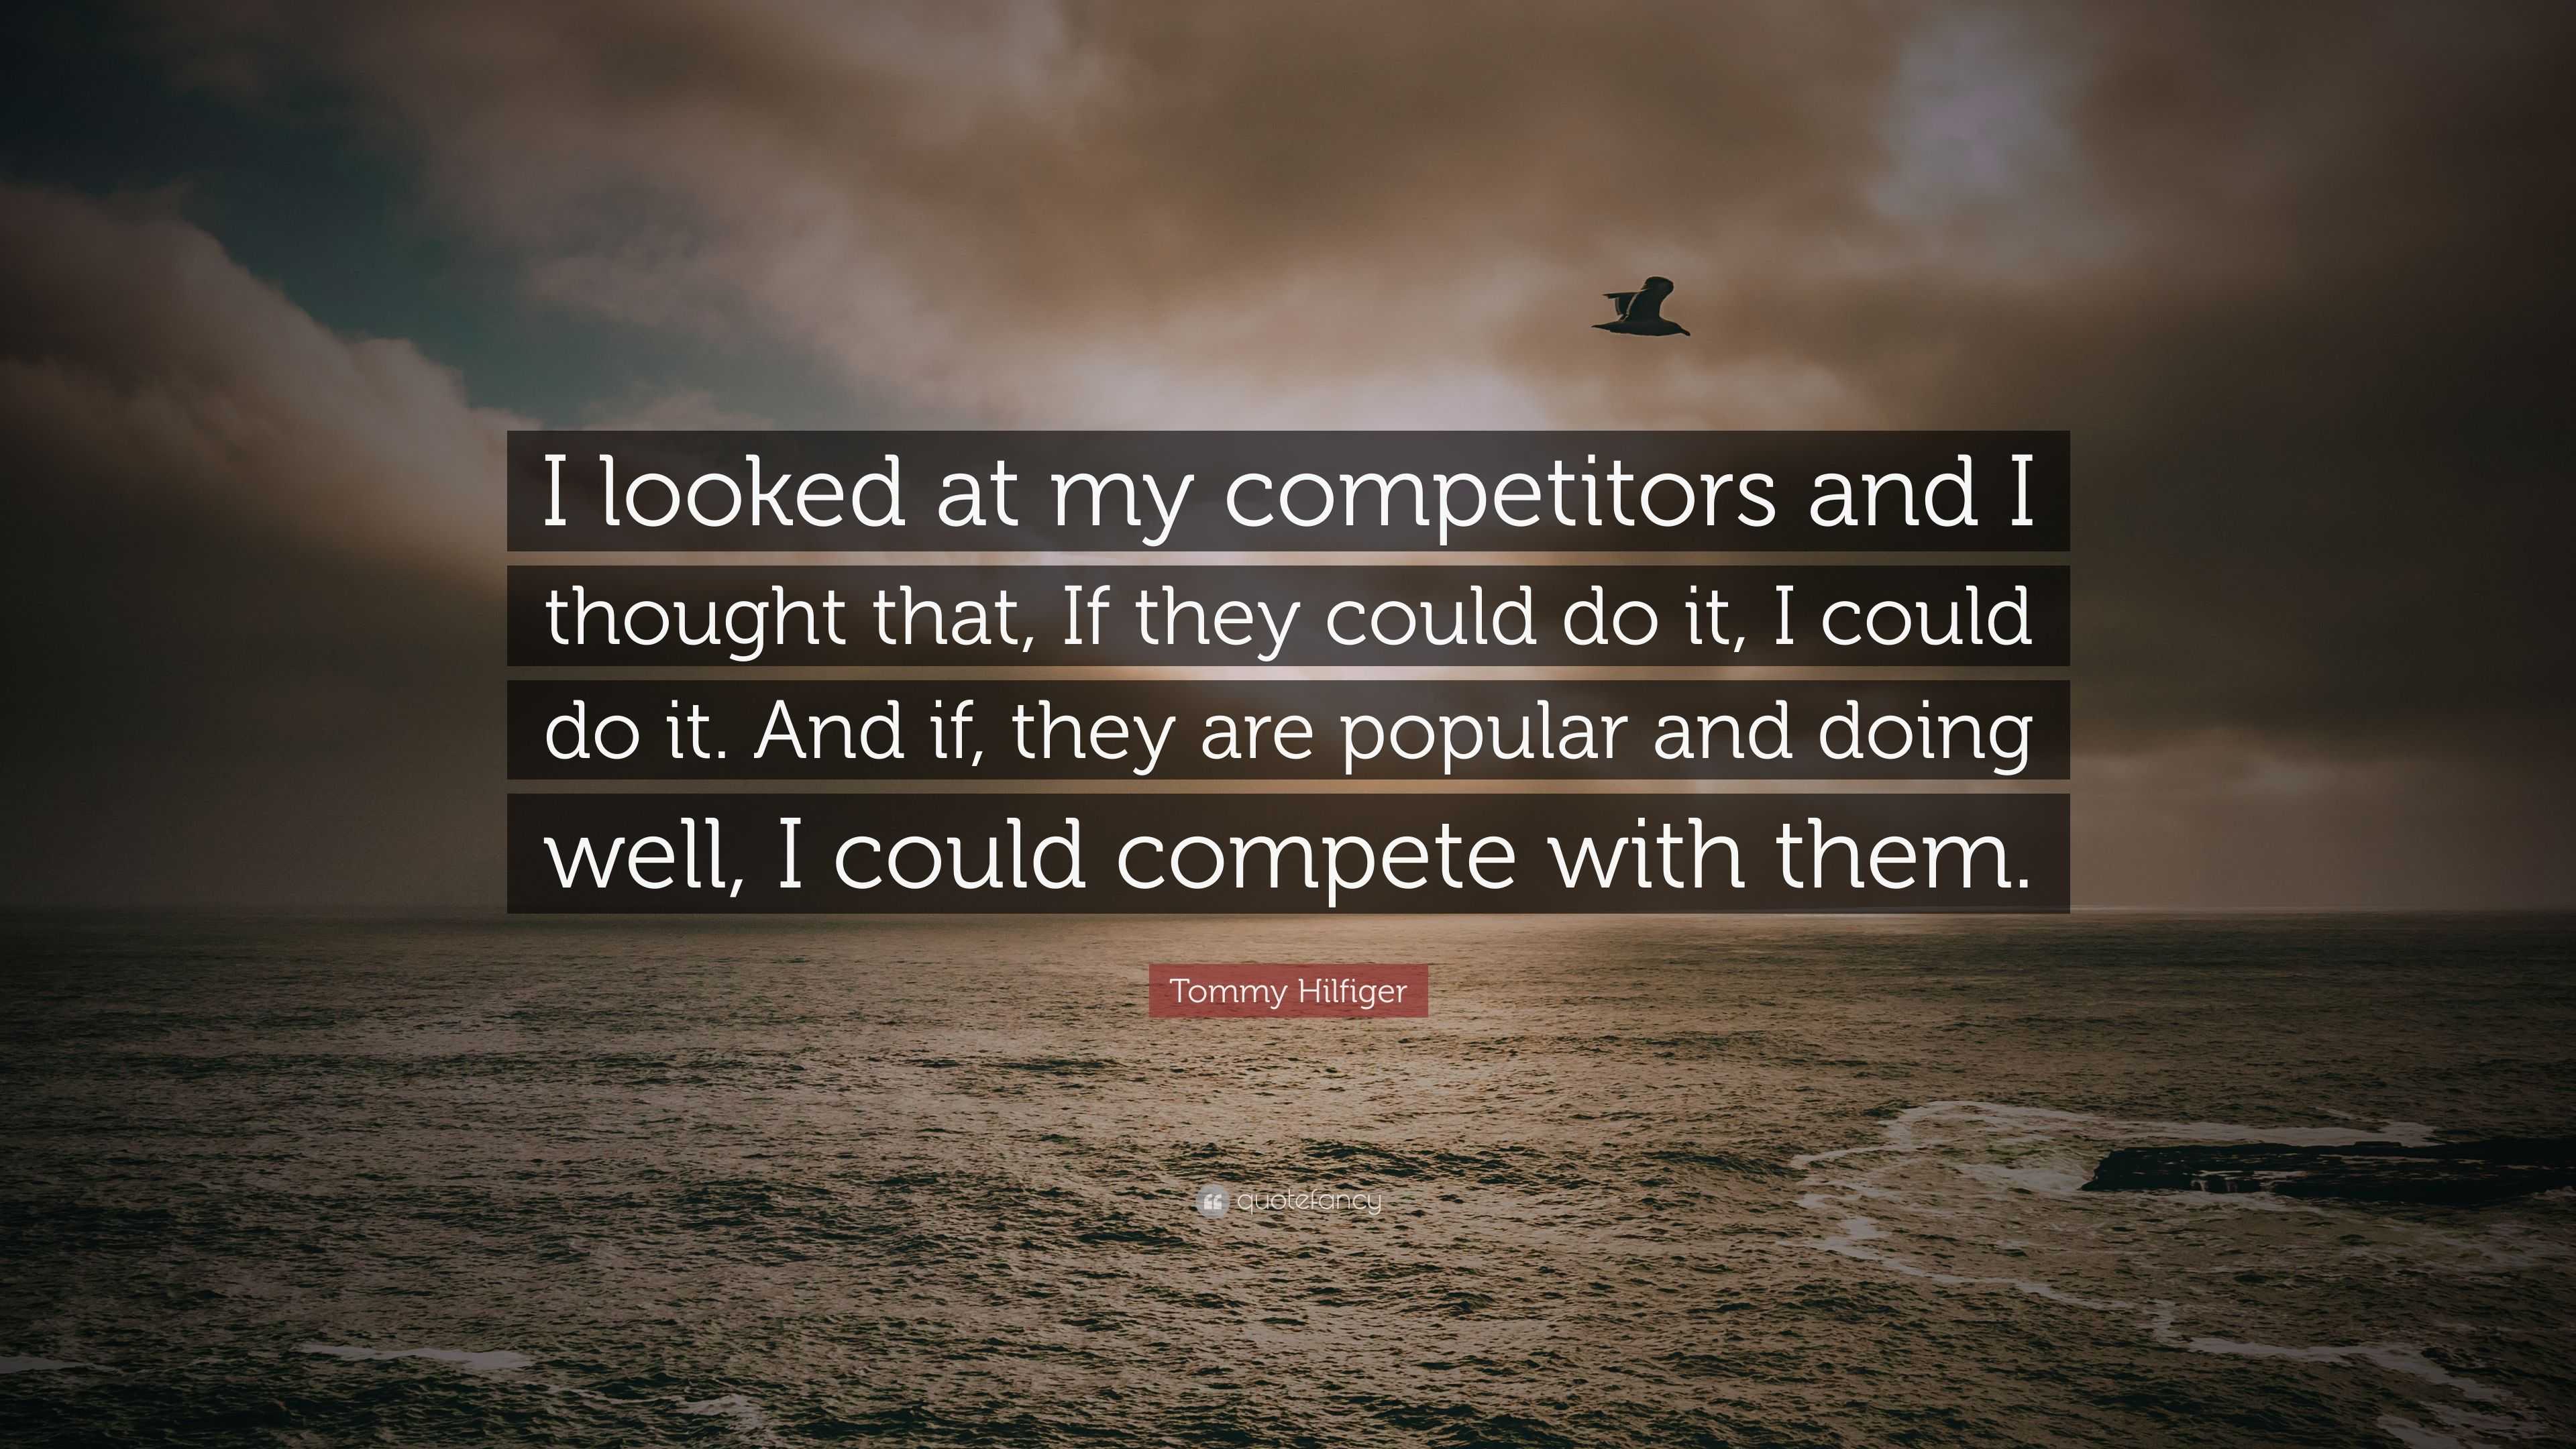 Cerebrum D.w.z Goodwill Tommy Hilfiger Quote: “I looked at my competitors and I thought that, If  they could do it, I could do it. And if, they are popular and doing we...”